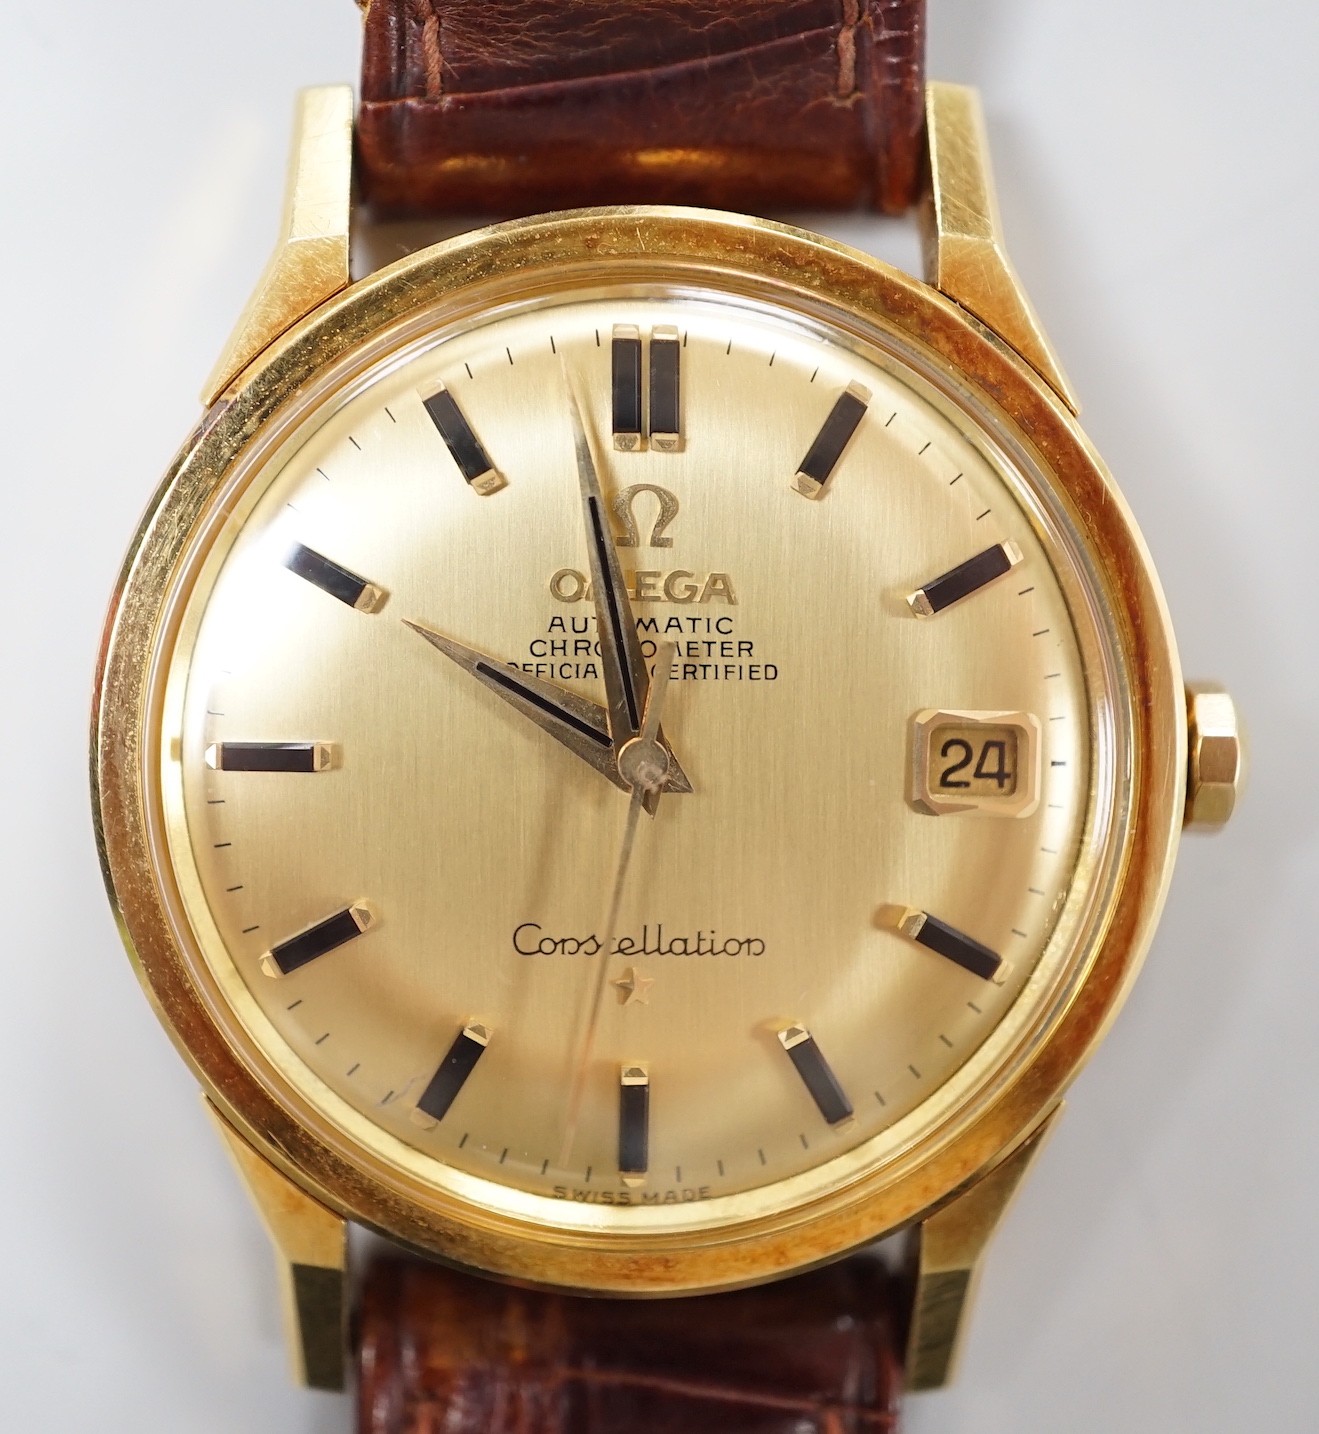 A gentleman's 750 yellow metal Omega Constellation Chronometre Automatic wrist watch, with date aperture, on Omega leather strap with gold plated Omega buckle, case diameter 34mm.